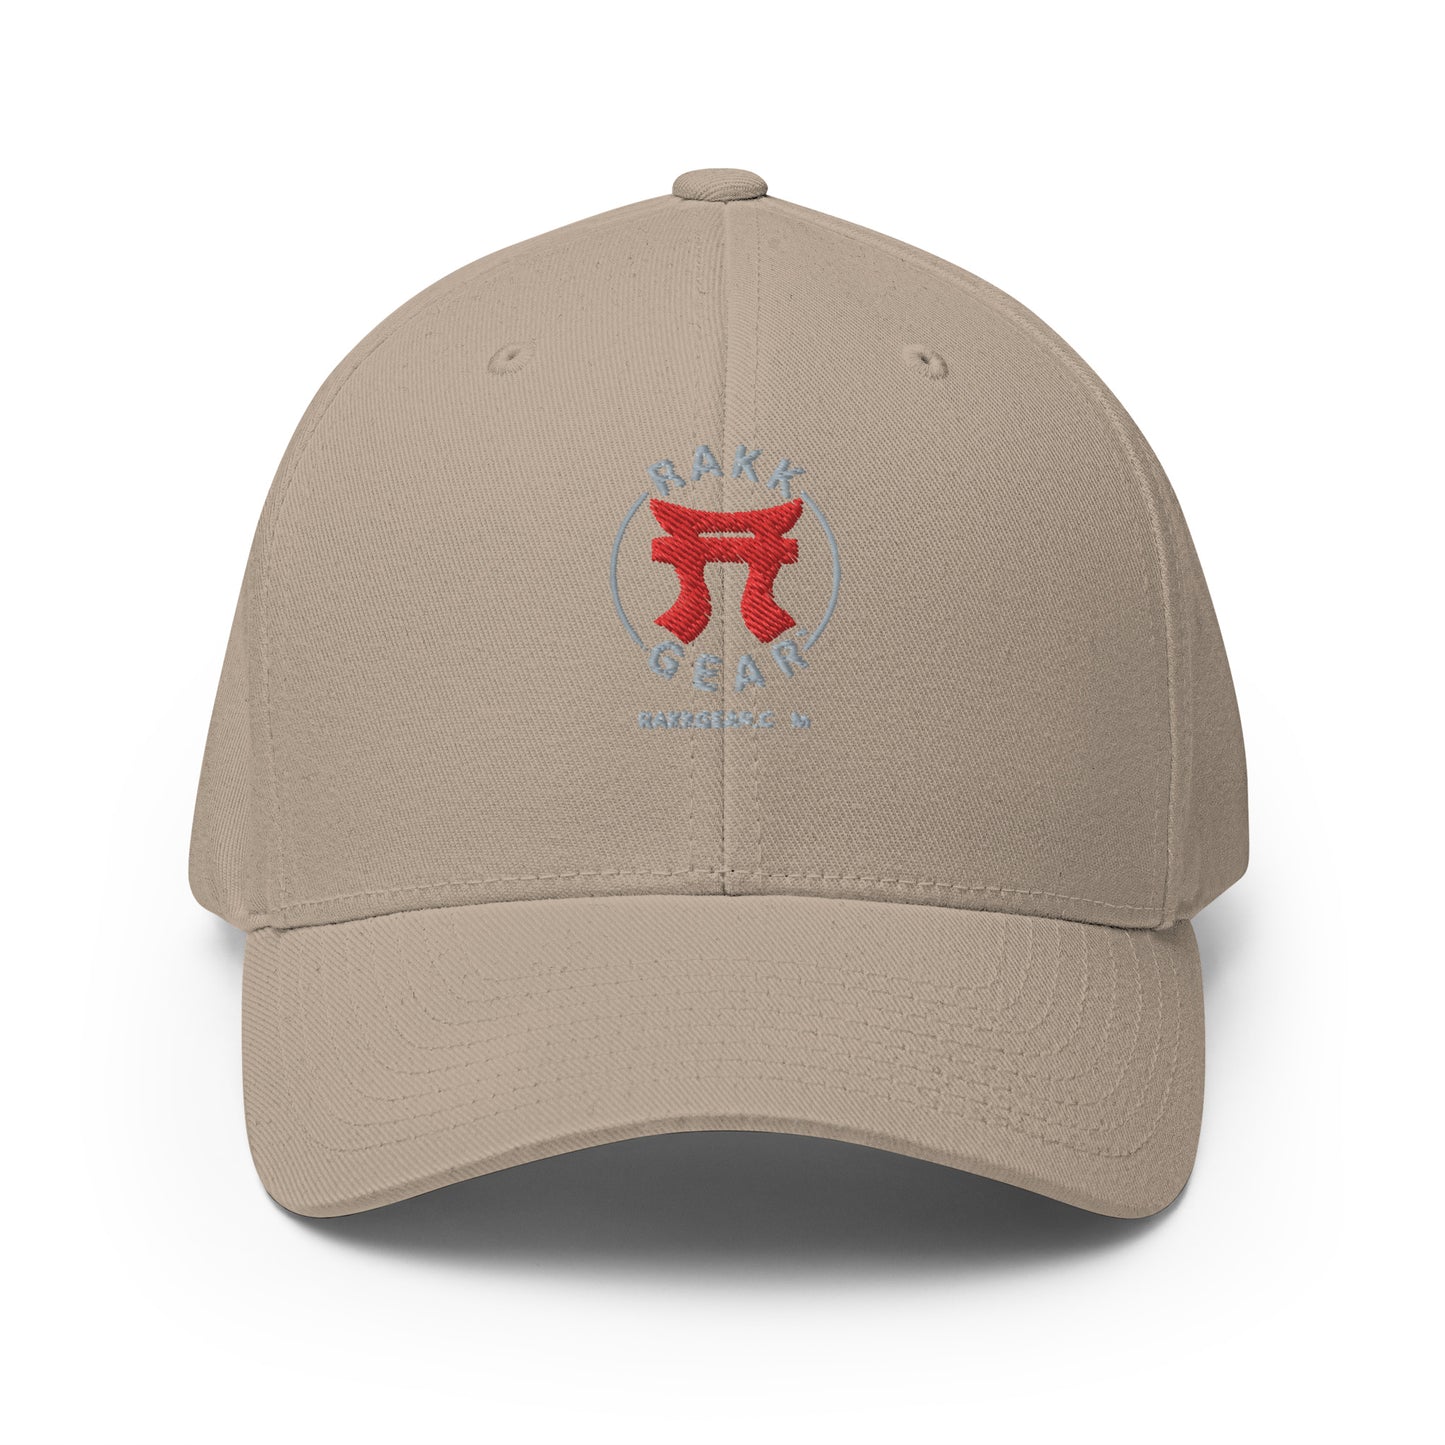 Rakkgear Embroidered Khaki Fitted Baseball Cap: Stylish cap with Iconic Rakkgear Logo embroidery on the front.